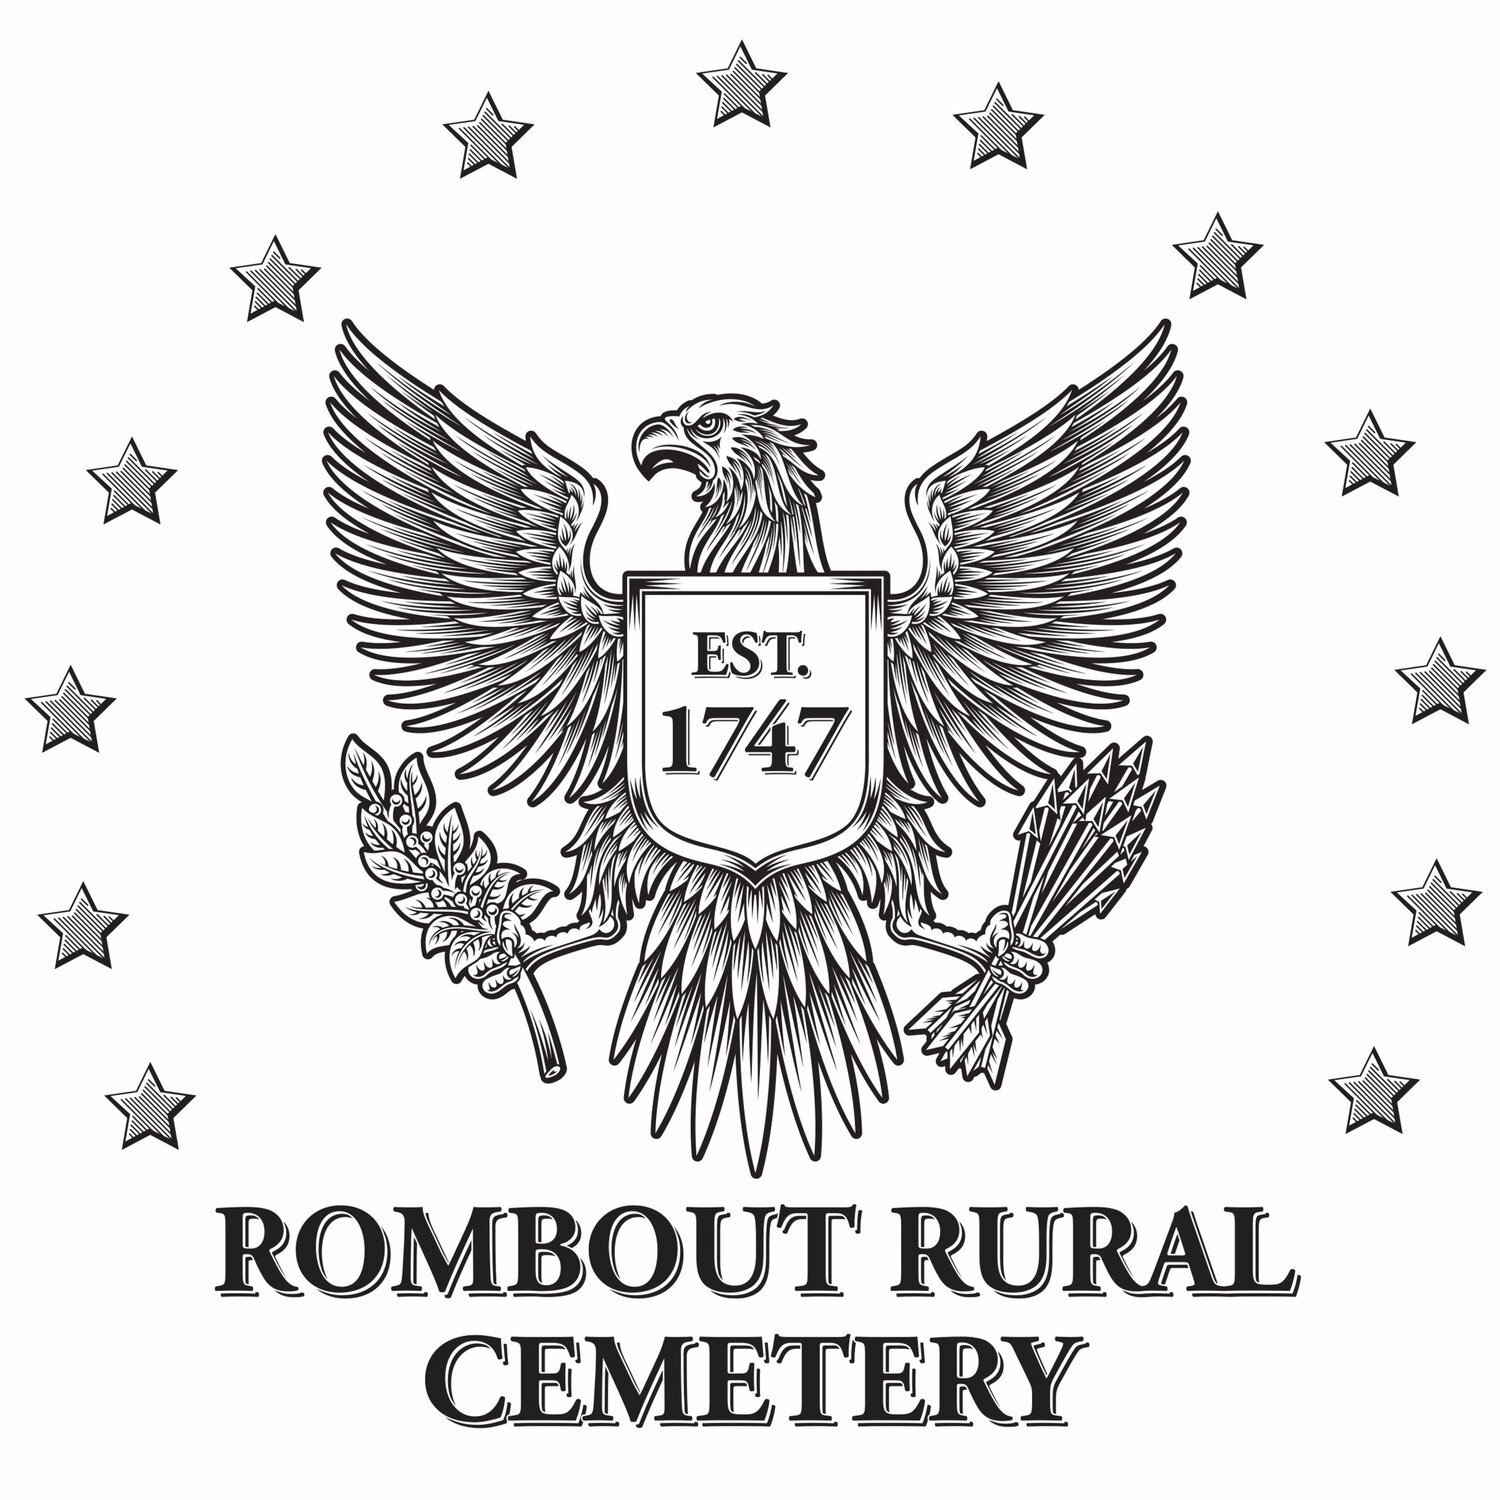 Rombout Rural Cemetery Association